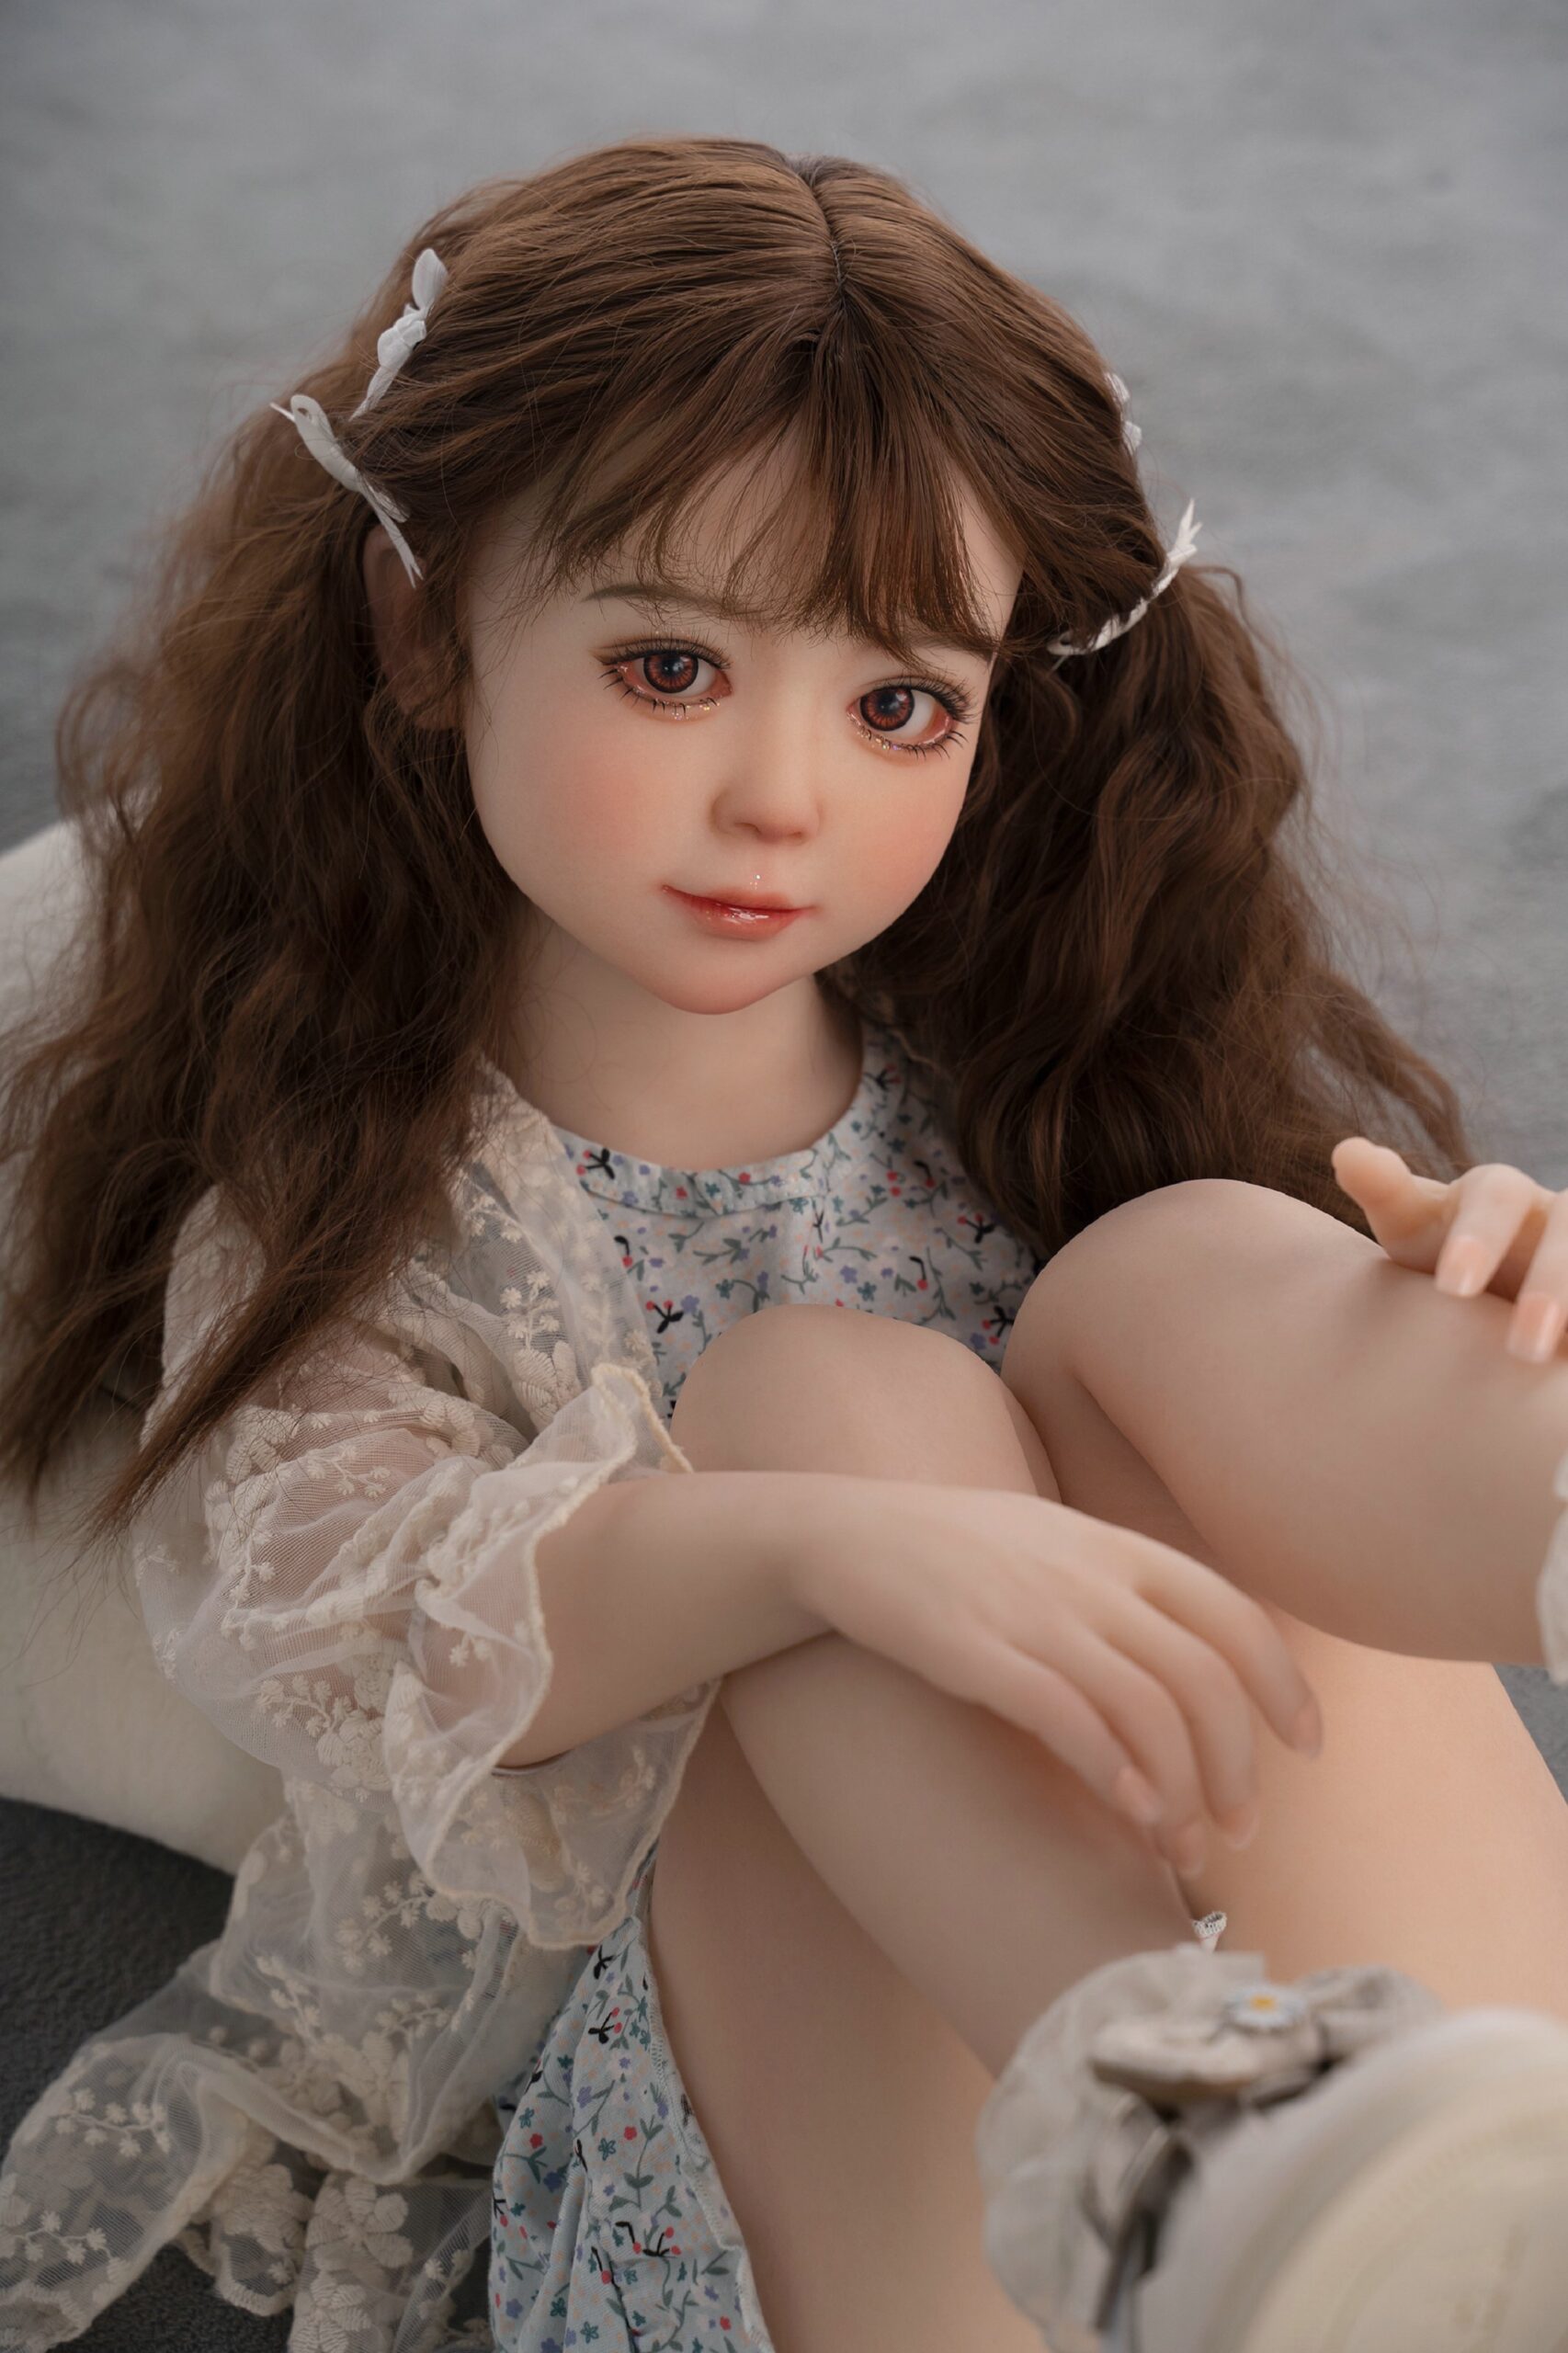 110cm flat chest young sex doll